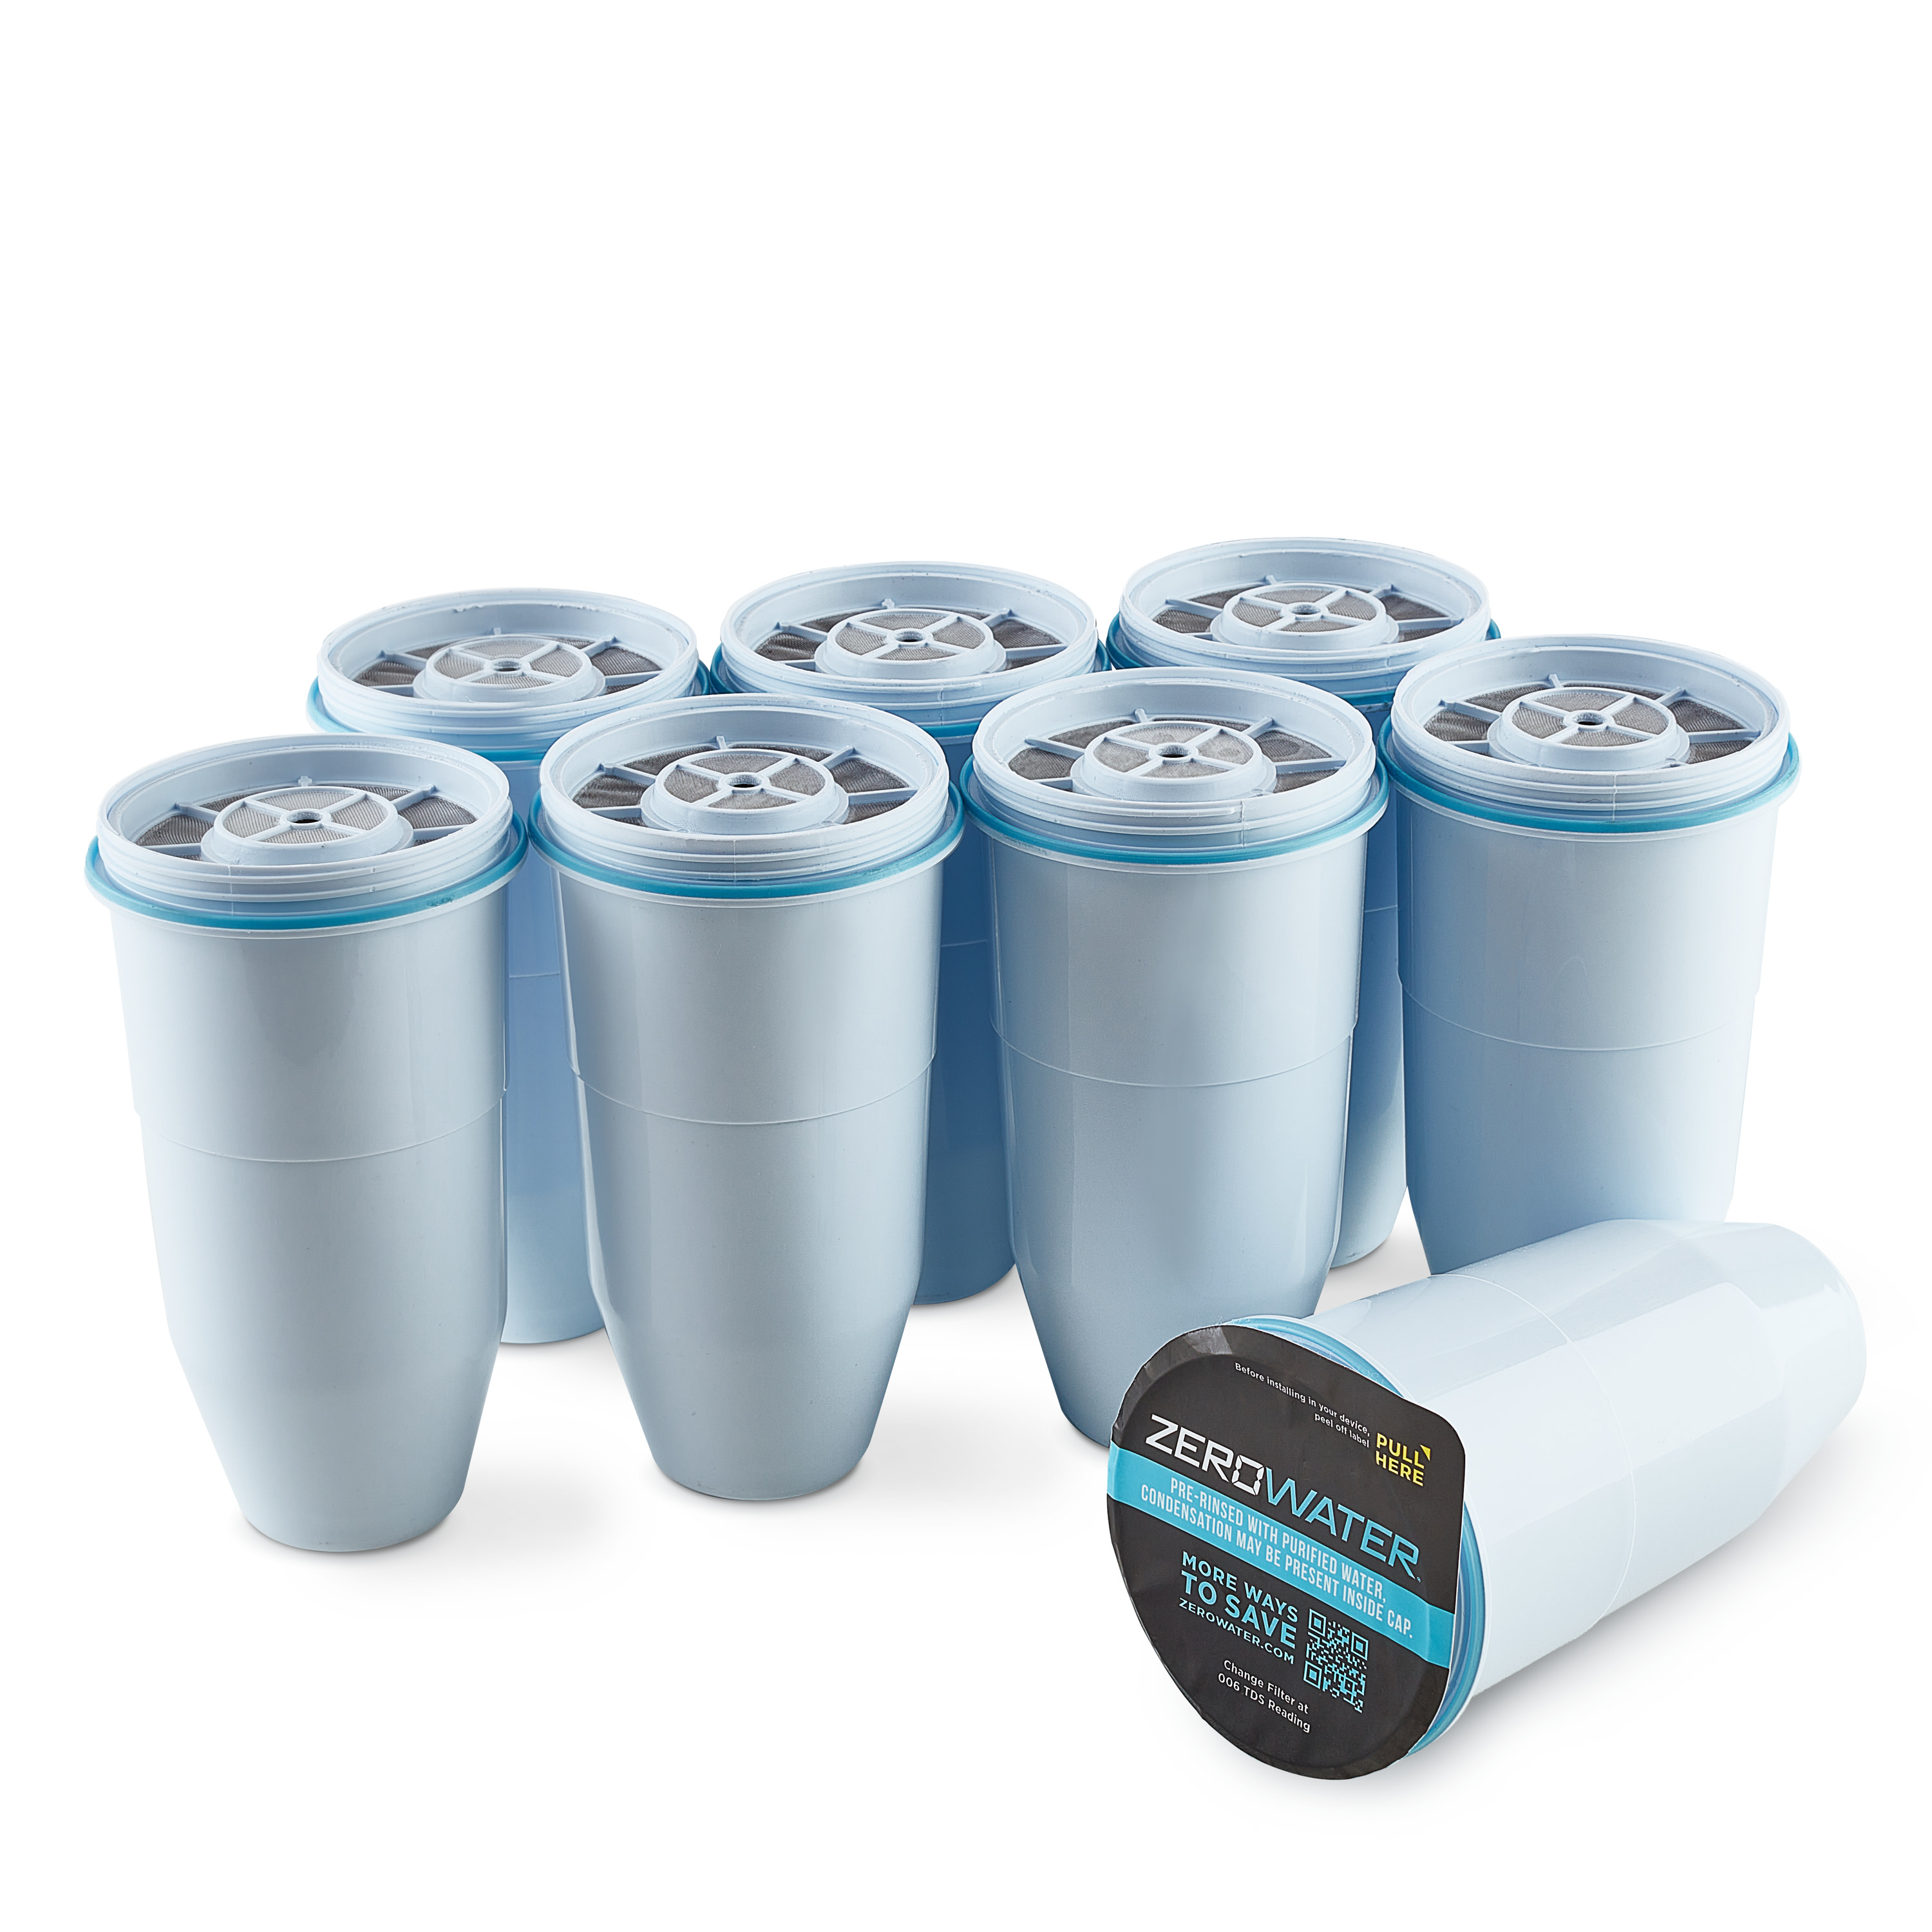 Zerowater 5-Stage Water Filter Replacement - 8 Pack - image 1 of 4